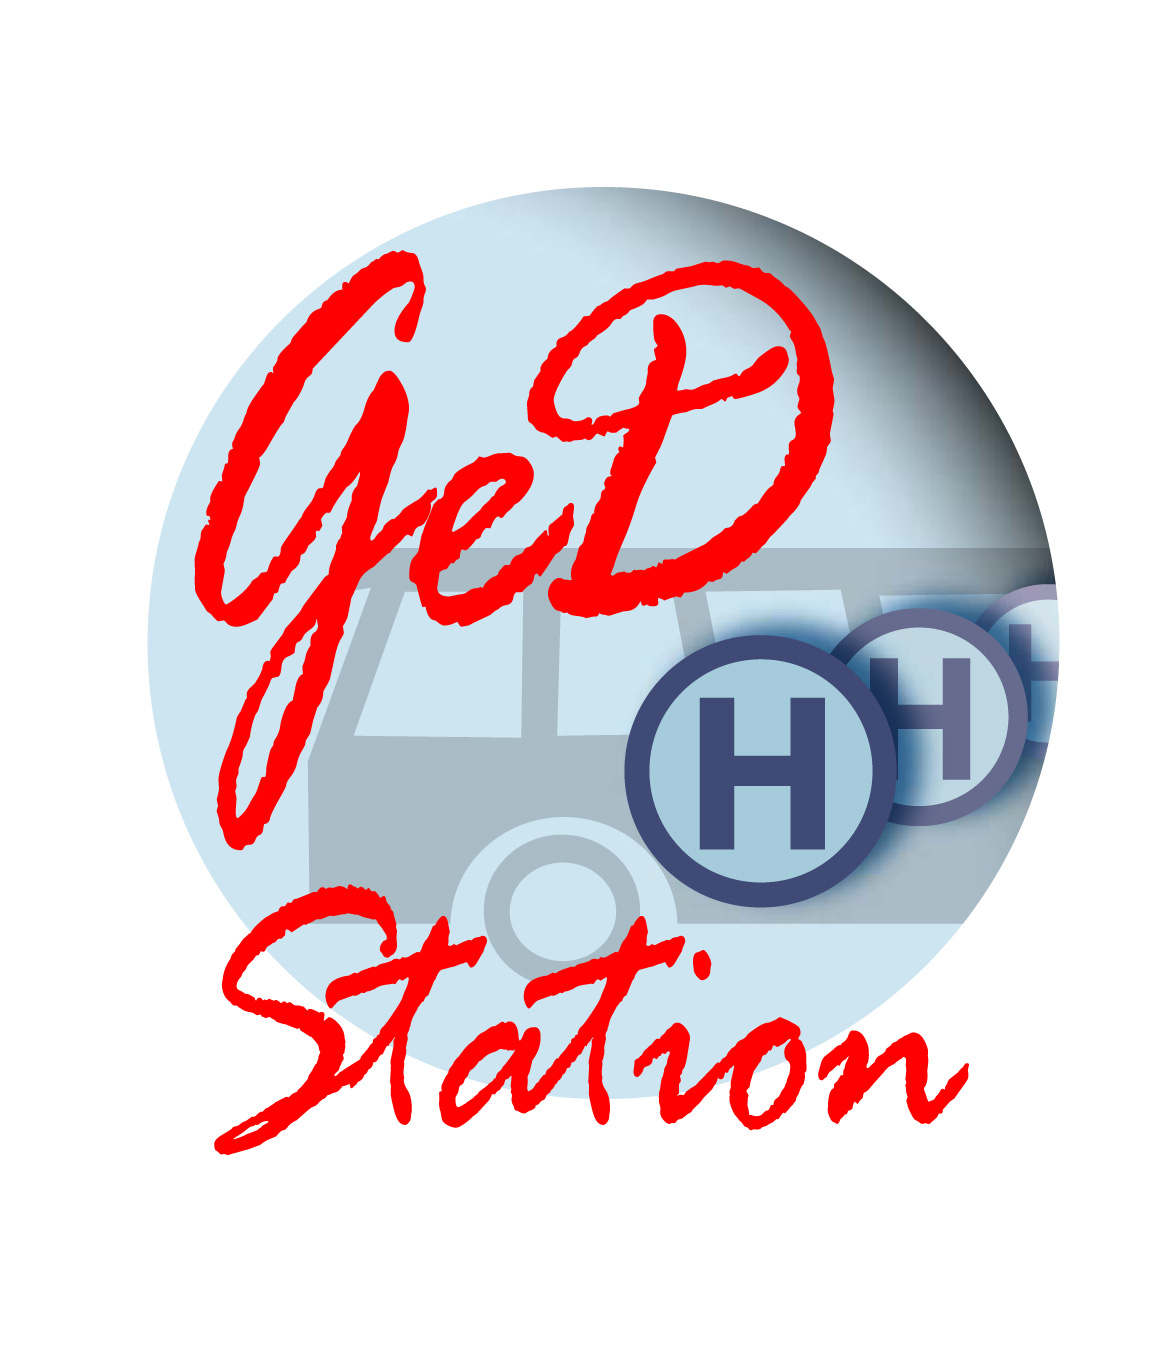 GeD-Station